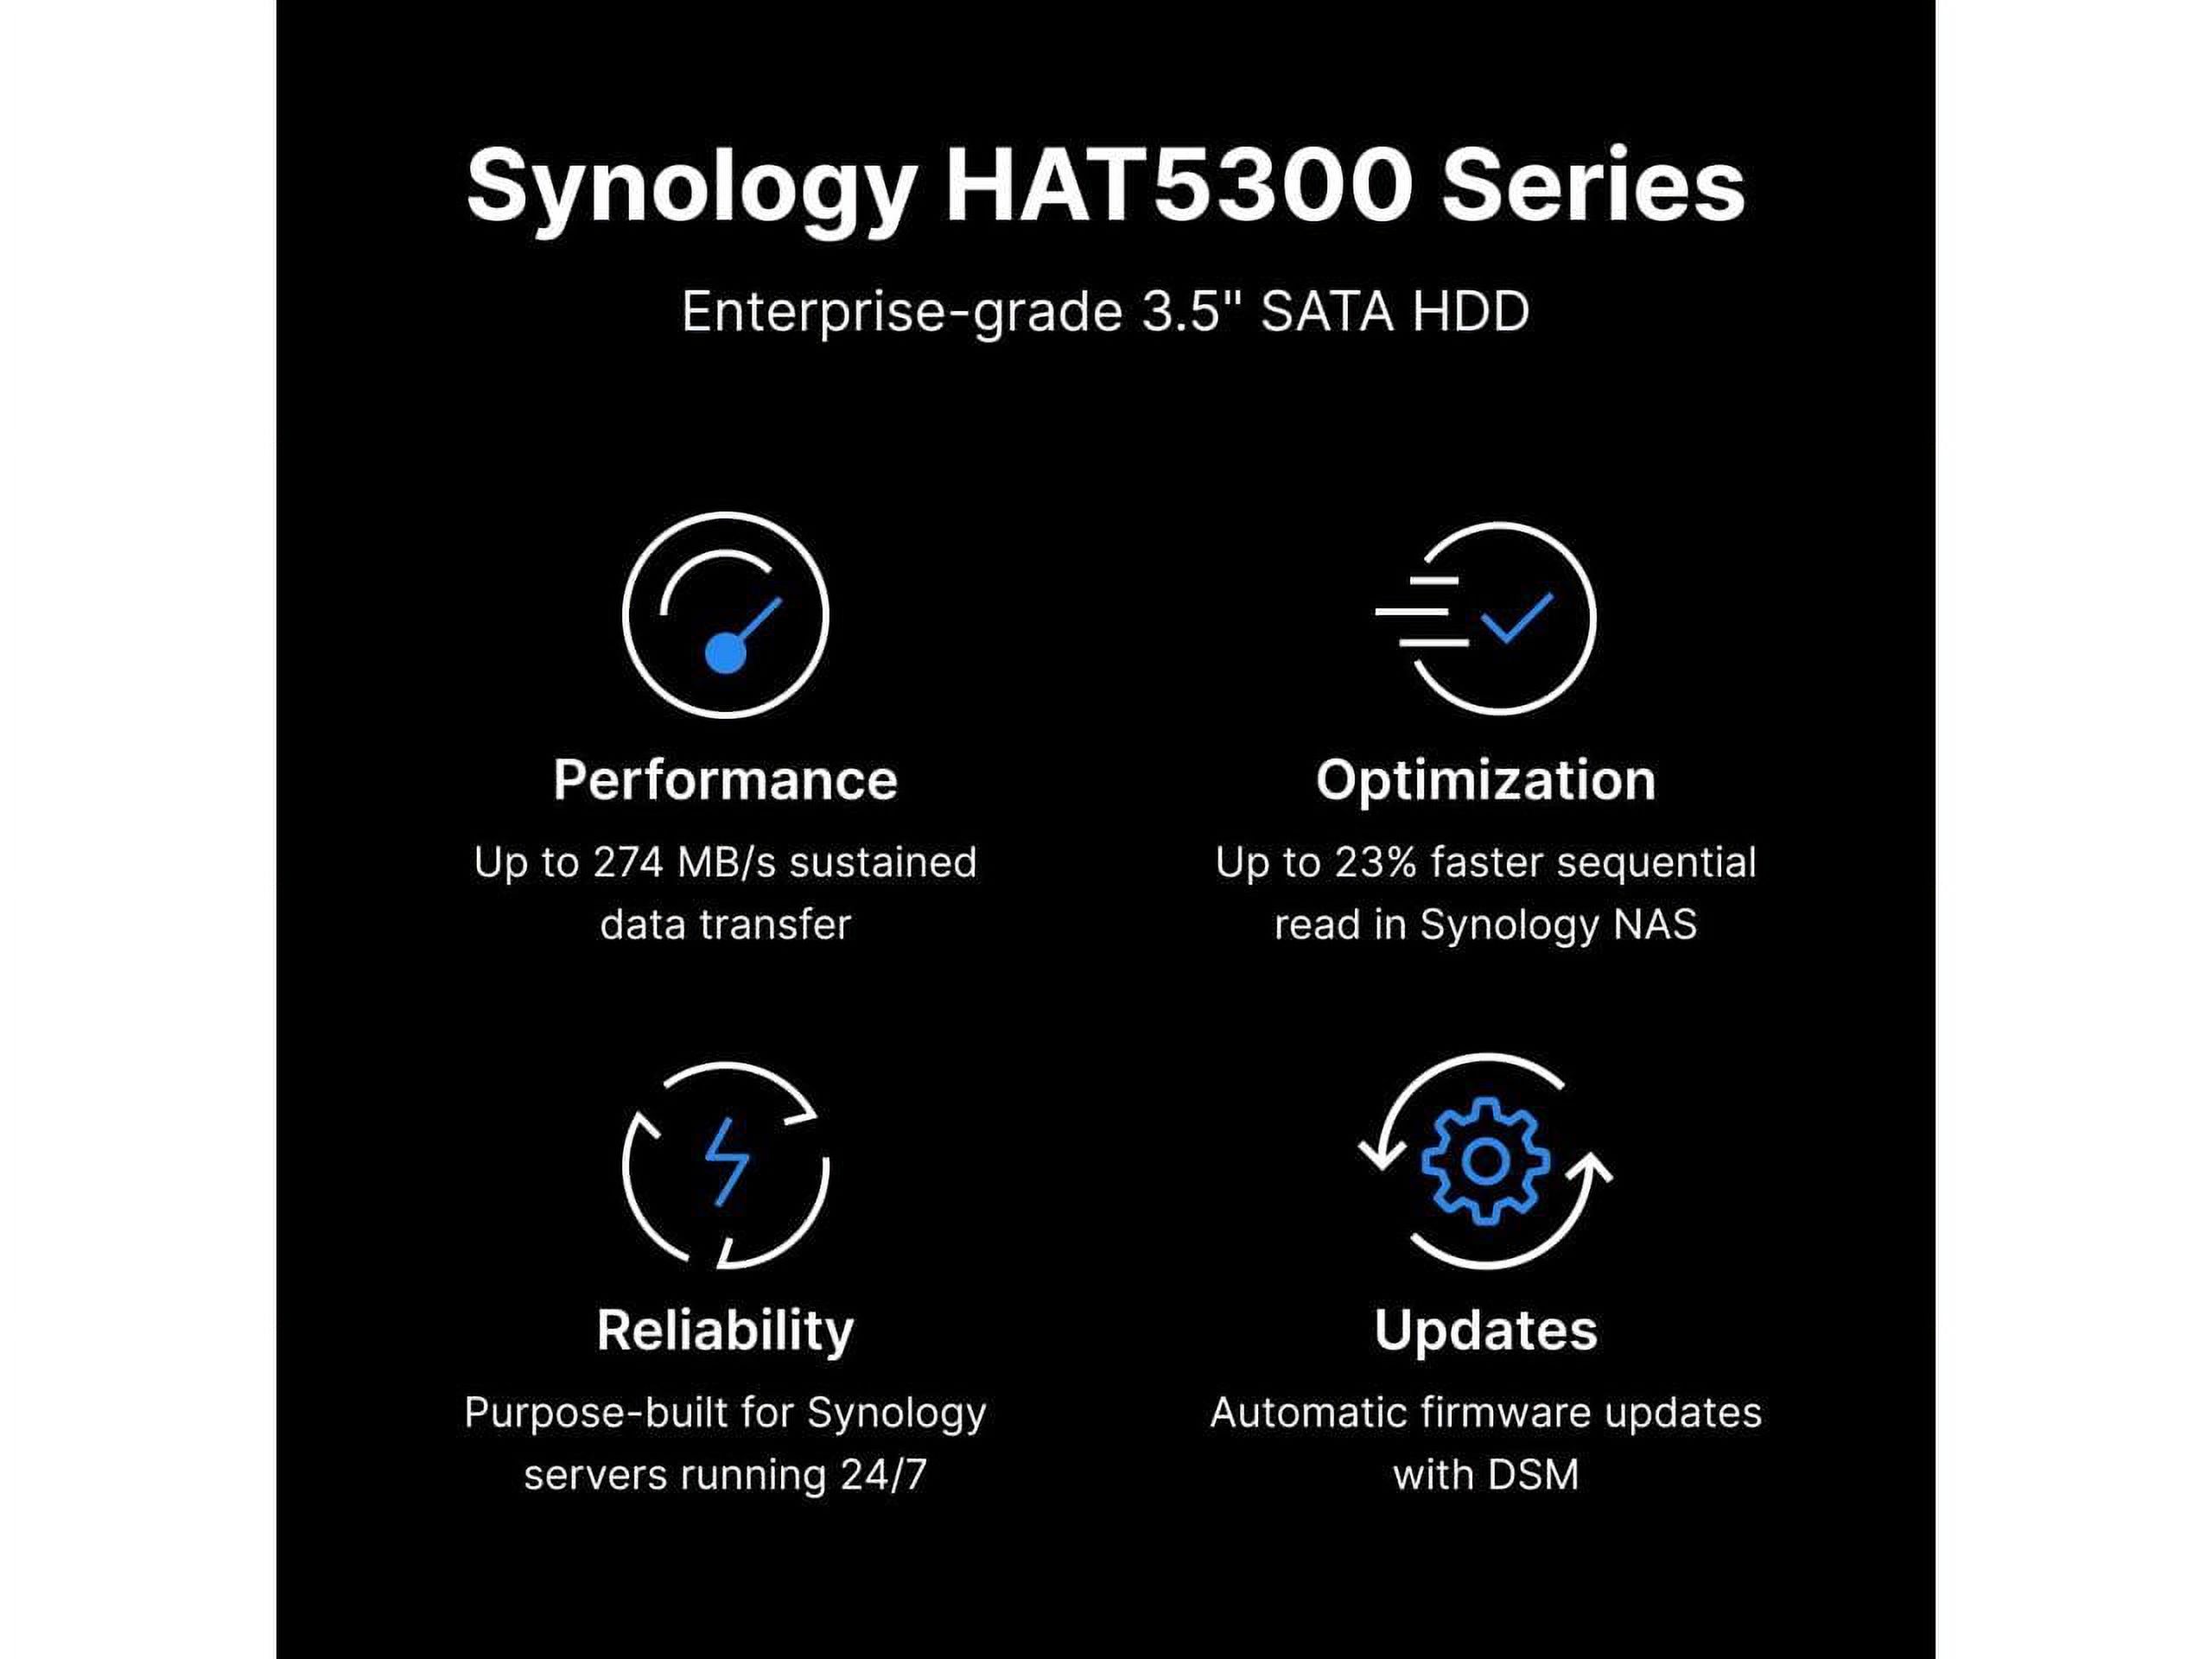 Synology HAT5300-4T 4TB 7200 RPM 256MB Cache SATA 6.0Gb/s 3.5" Enterprise 3.5" SATA HDD Retail - image 3 of 4